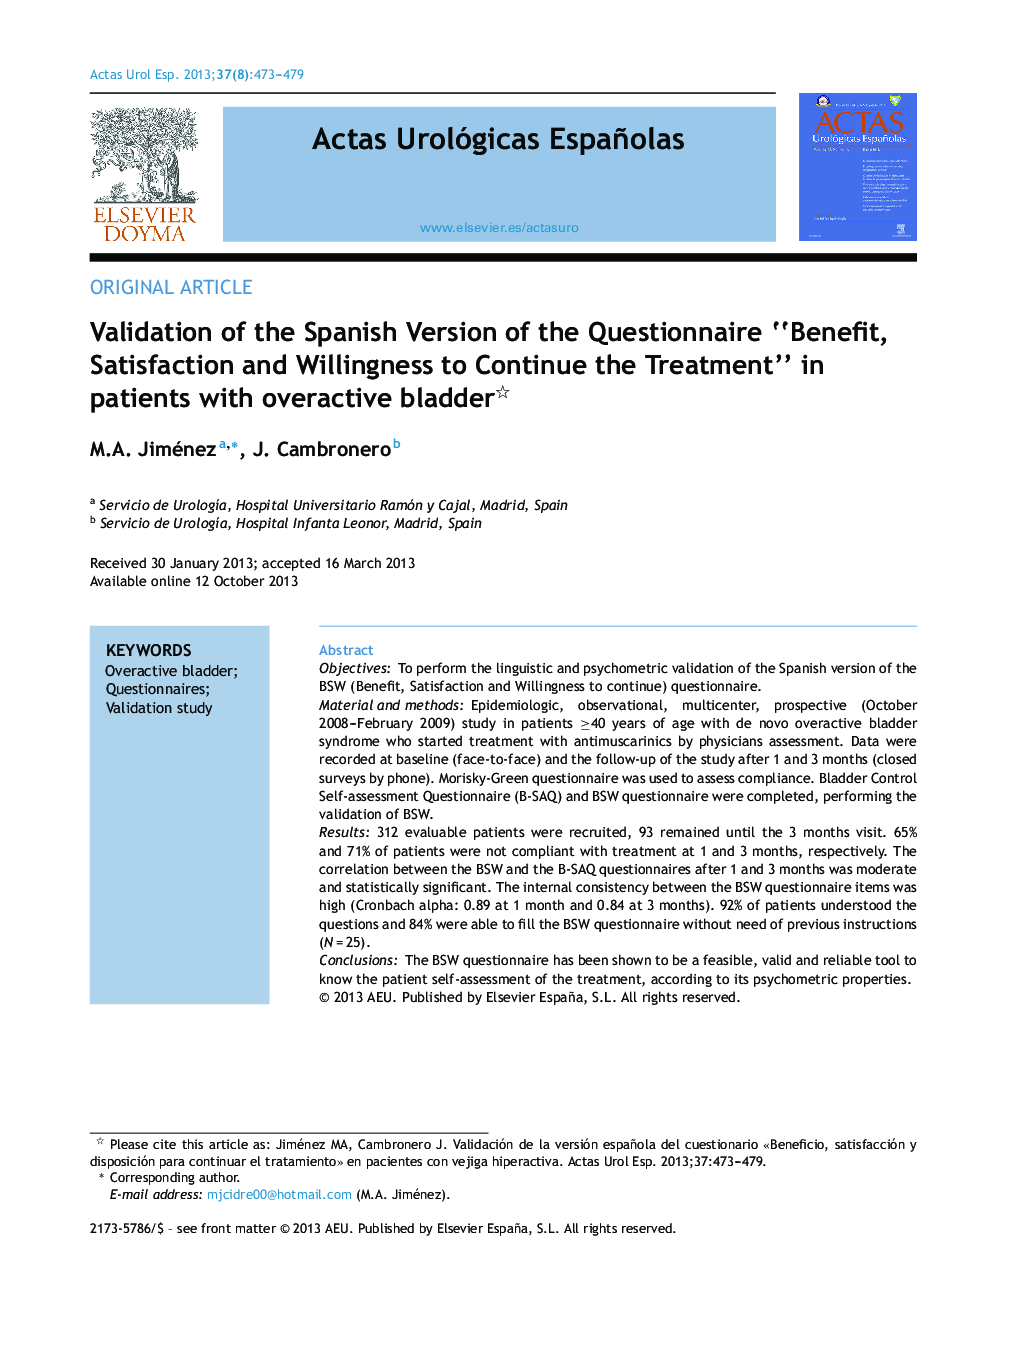 Validation of the Spanish Version of the Questionnaire “Benefit, Satisfaction and Willingness to Continue the Treatment” in patients with overactive bladder 